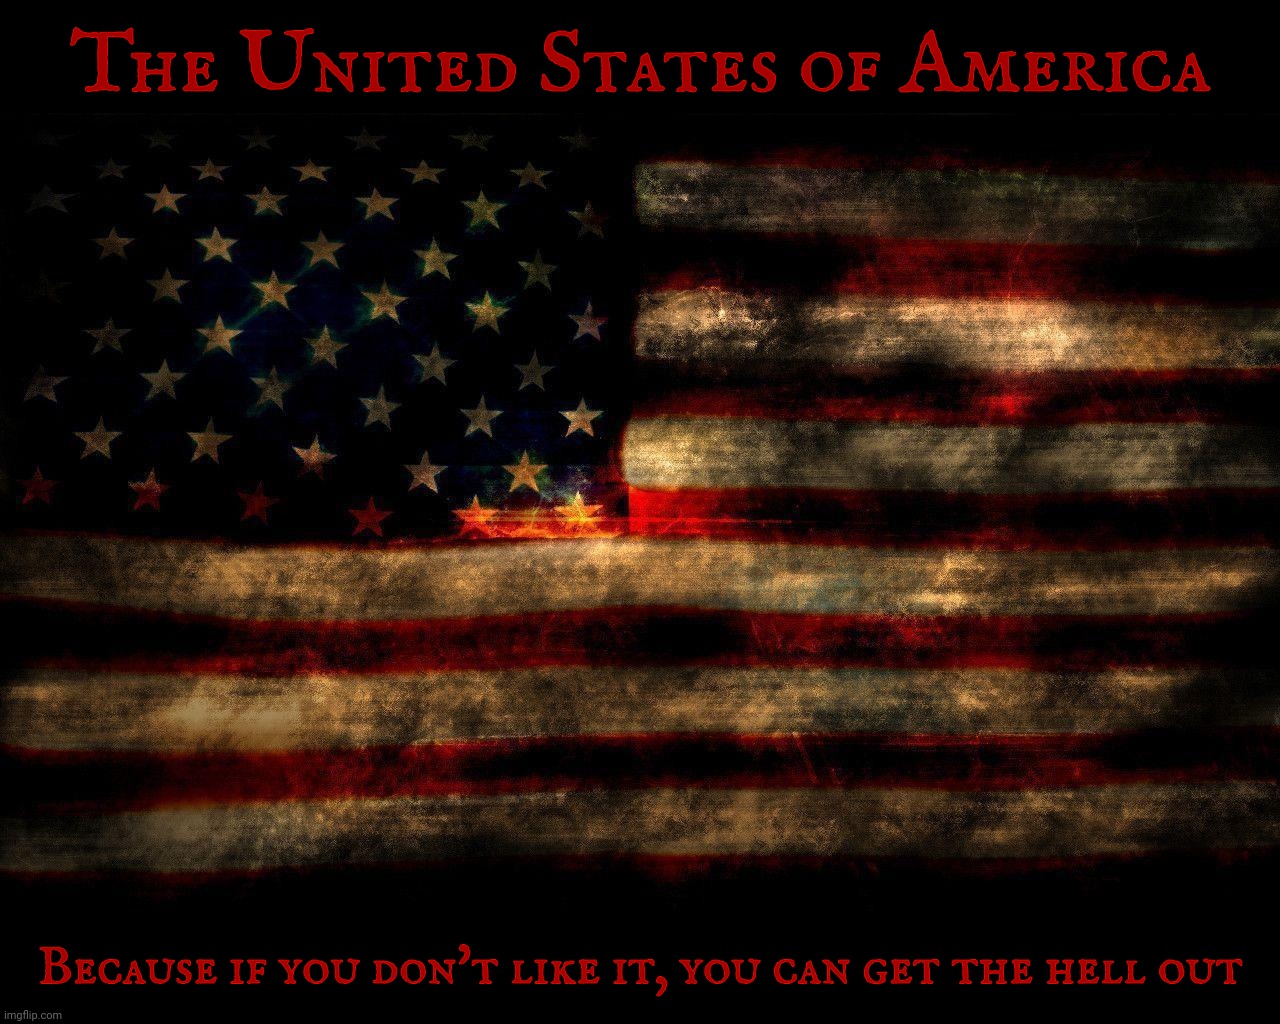 This is America. Not a consolation prize for treasonous losers | The United States of America Because if you don't like it, you can get the hell out | image tagged in usa flag lg 1280 x 1024,us flag,usa,united states of america,love it or leave it,no country for confederate losers | made w/ Imgflip meme maker